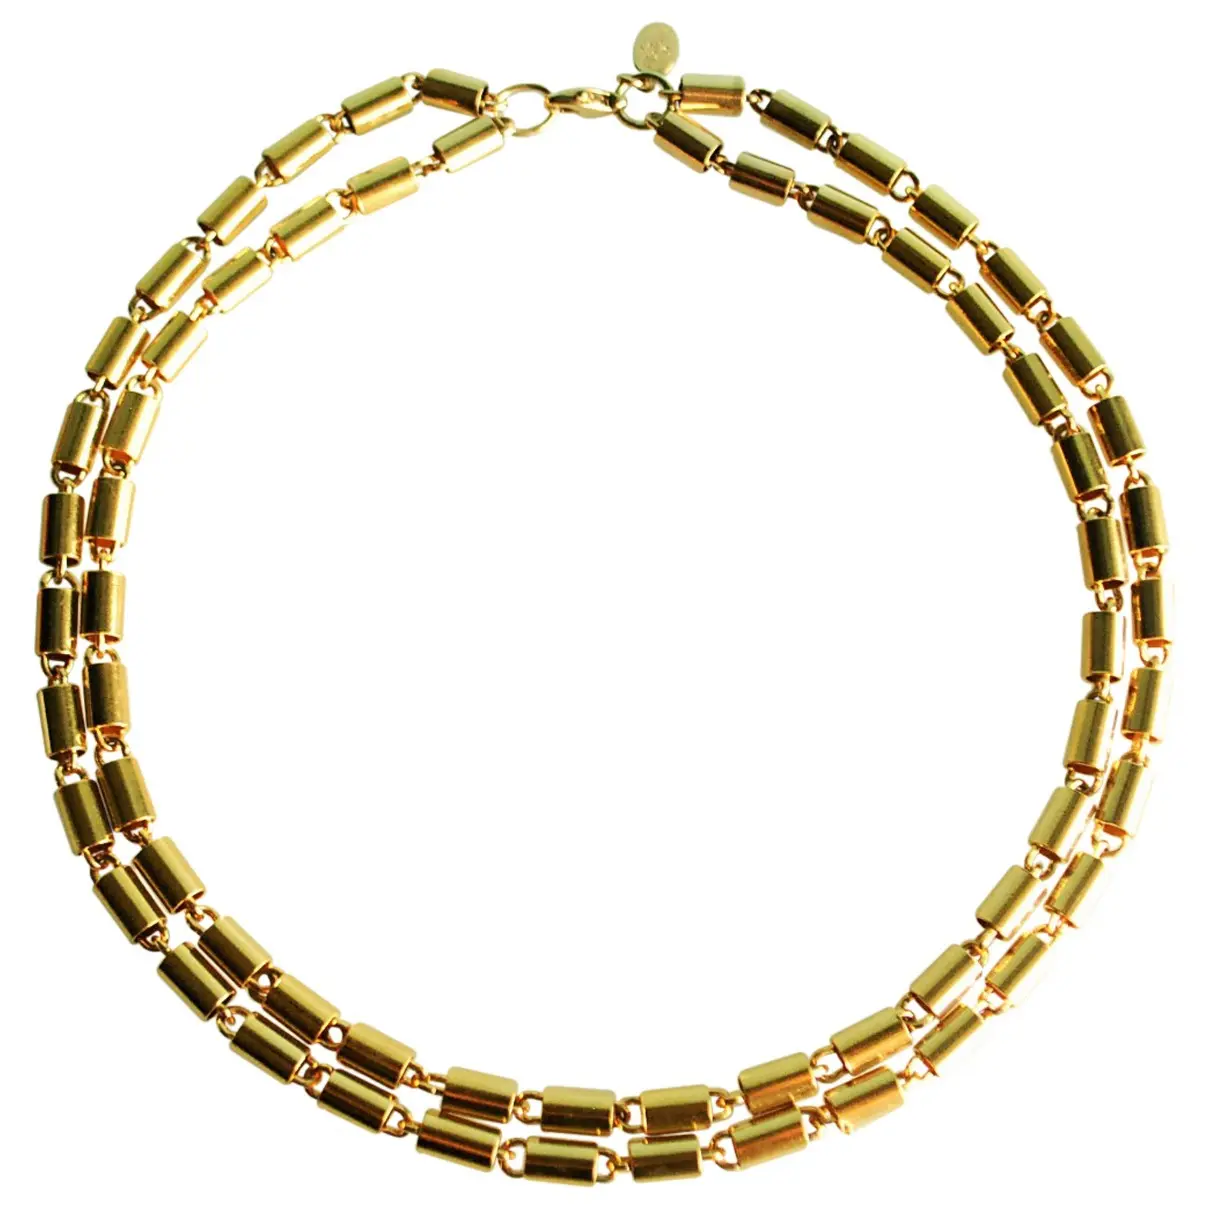 NECKLACE Givenchy - Vintage